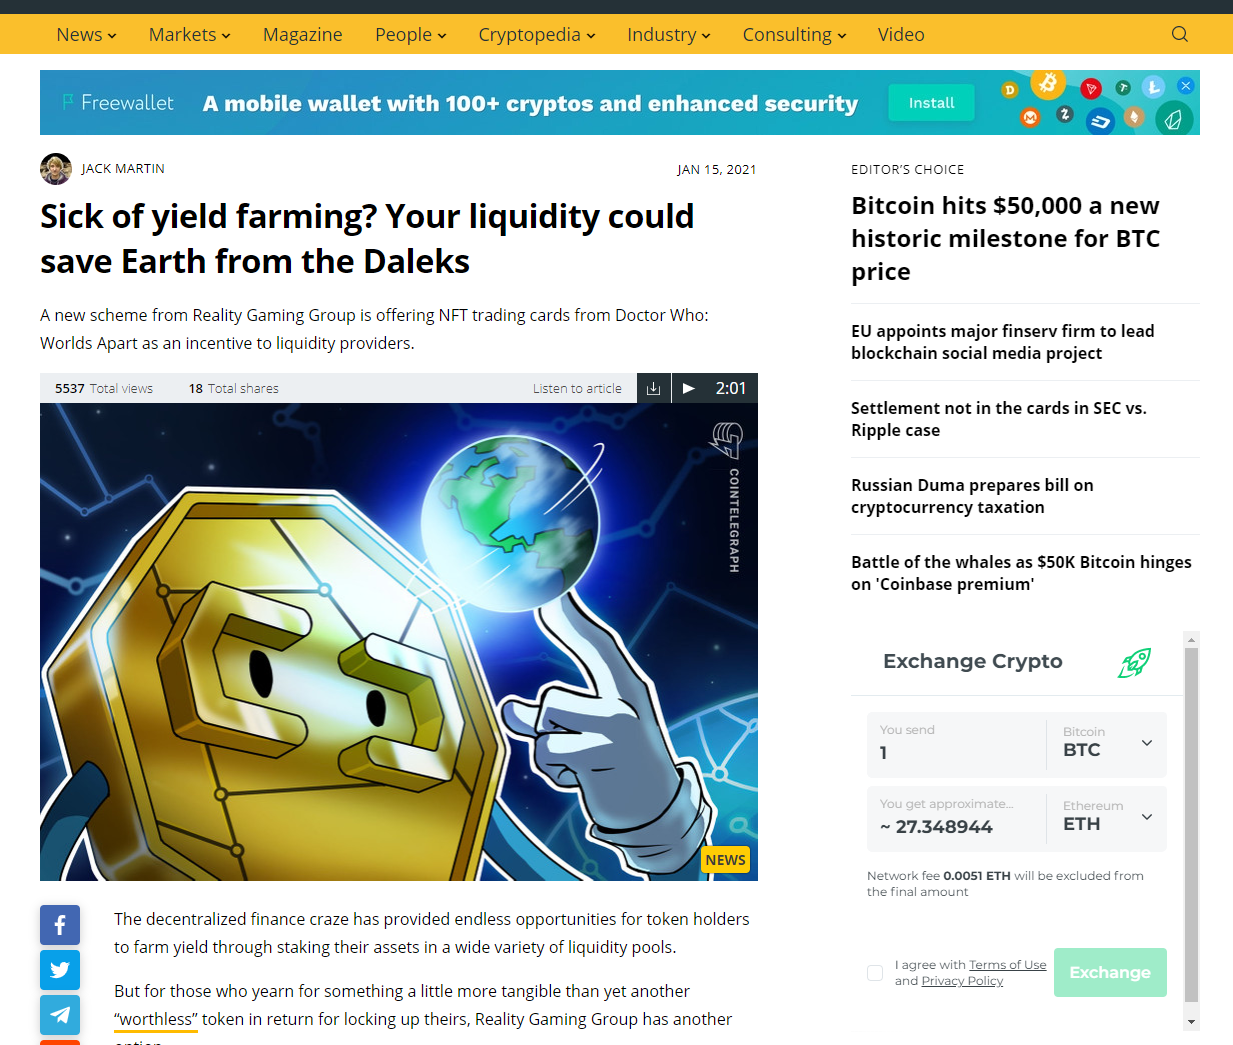 Sick of yield farming? Your liquidity could save Earth from the Daleks